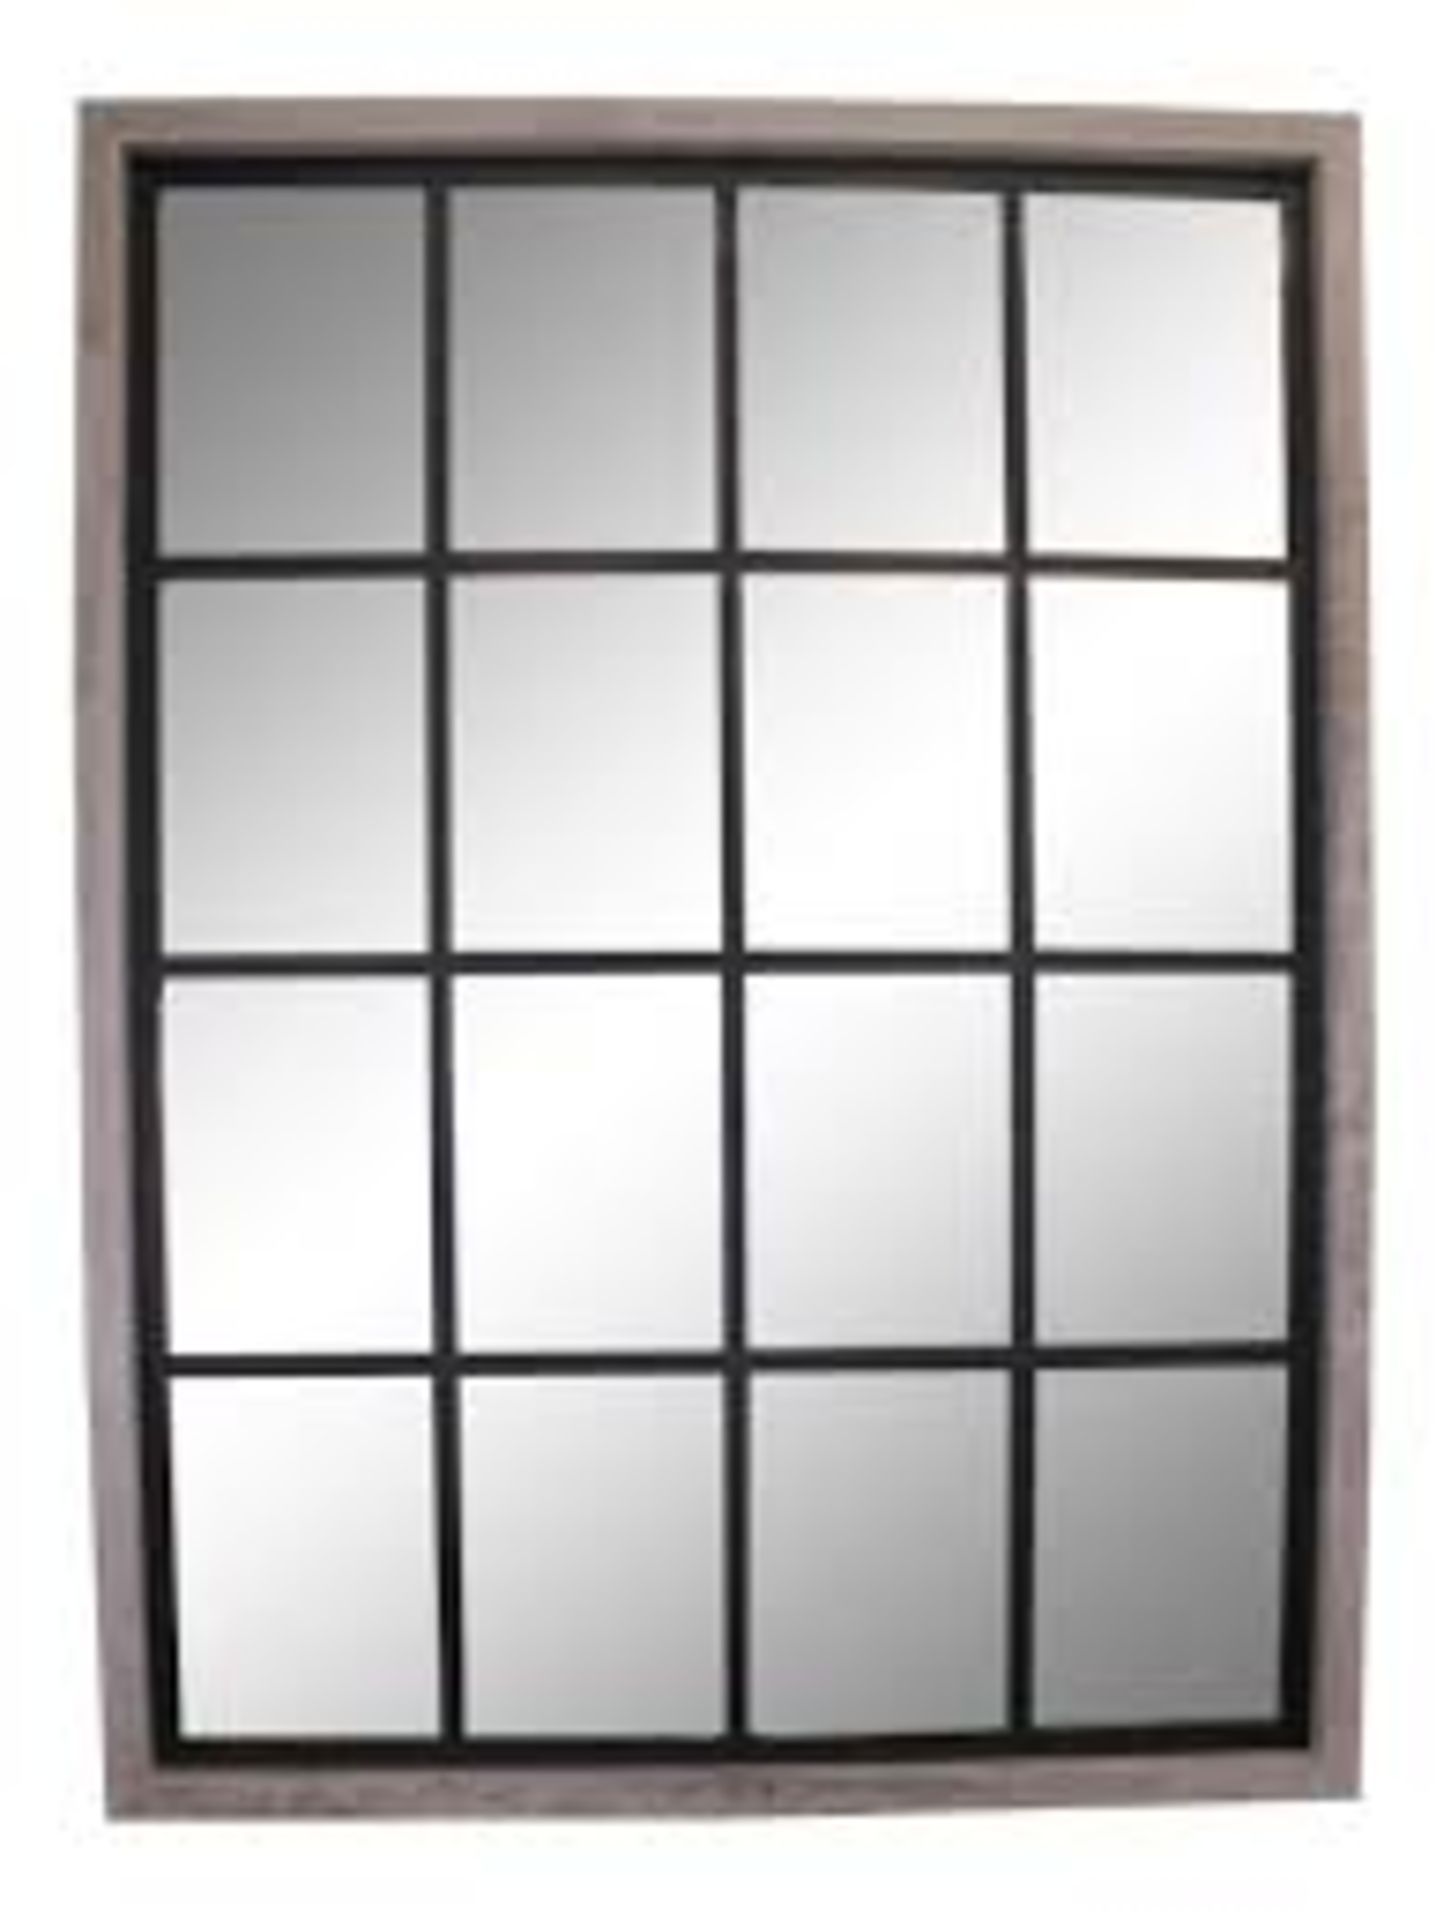 BOXED MALICK FOG FREE ACCENT MIRROR RRP £64.99 (AS SEEN IN WAYFAIR)Condition ReportAppraisal